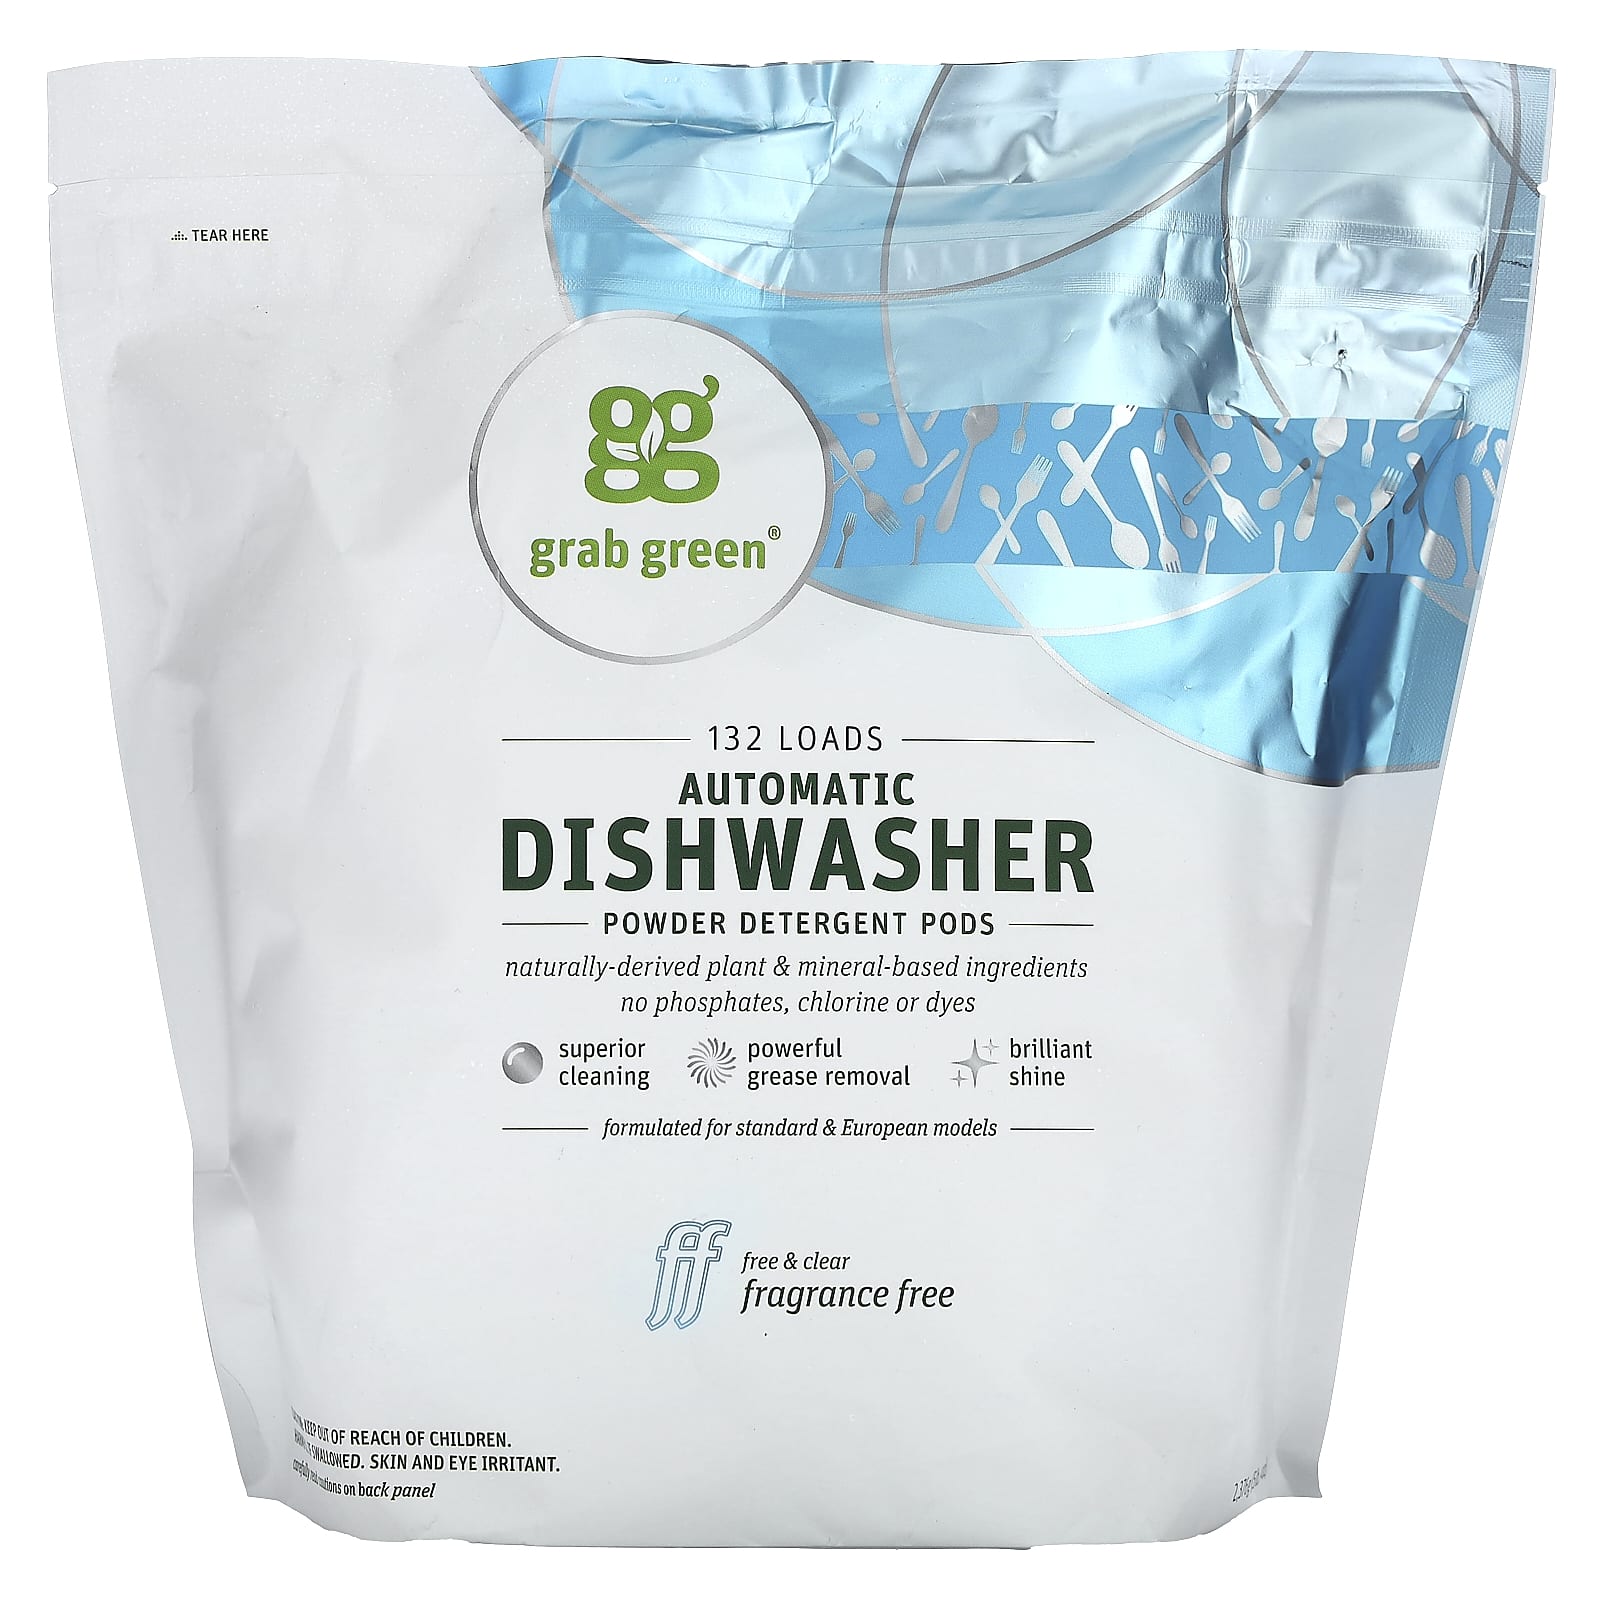  Dr. Mercola Greener, Cleaner Dishwasher Pouches, 24